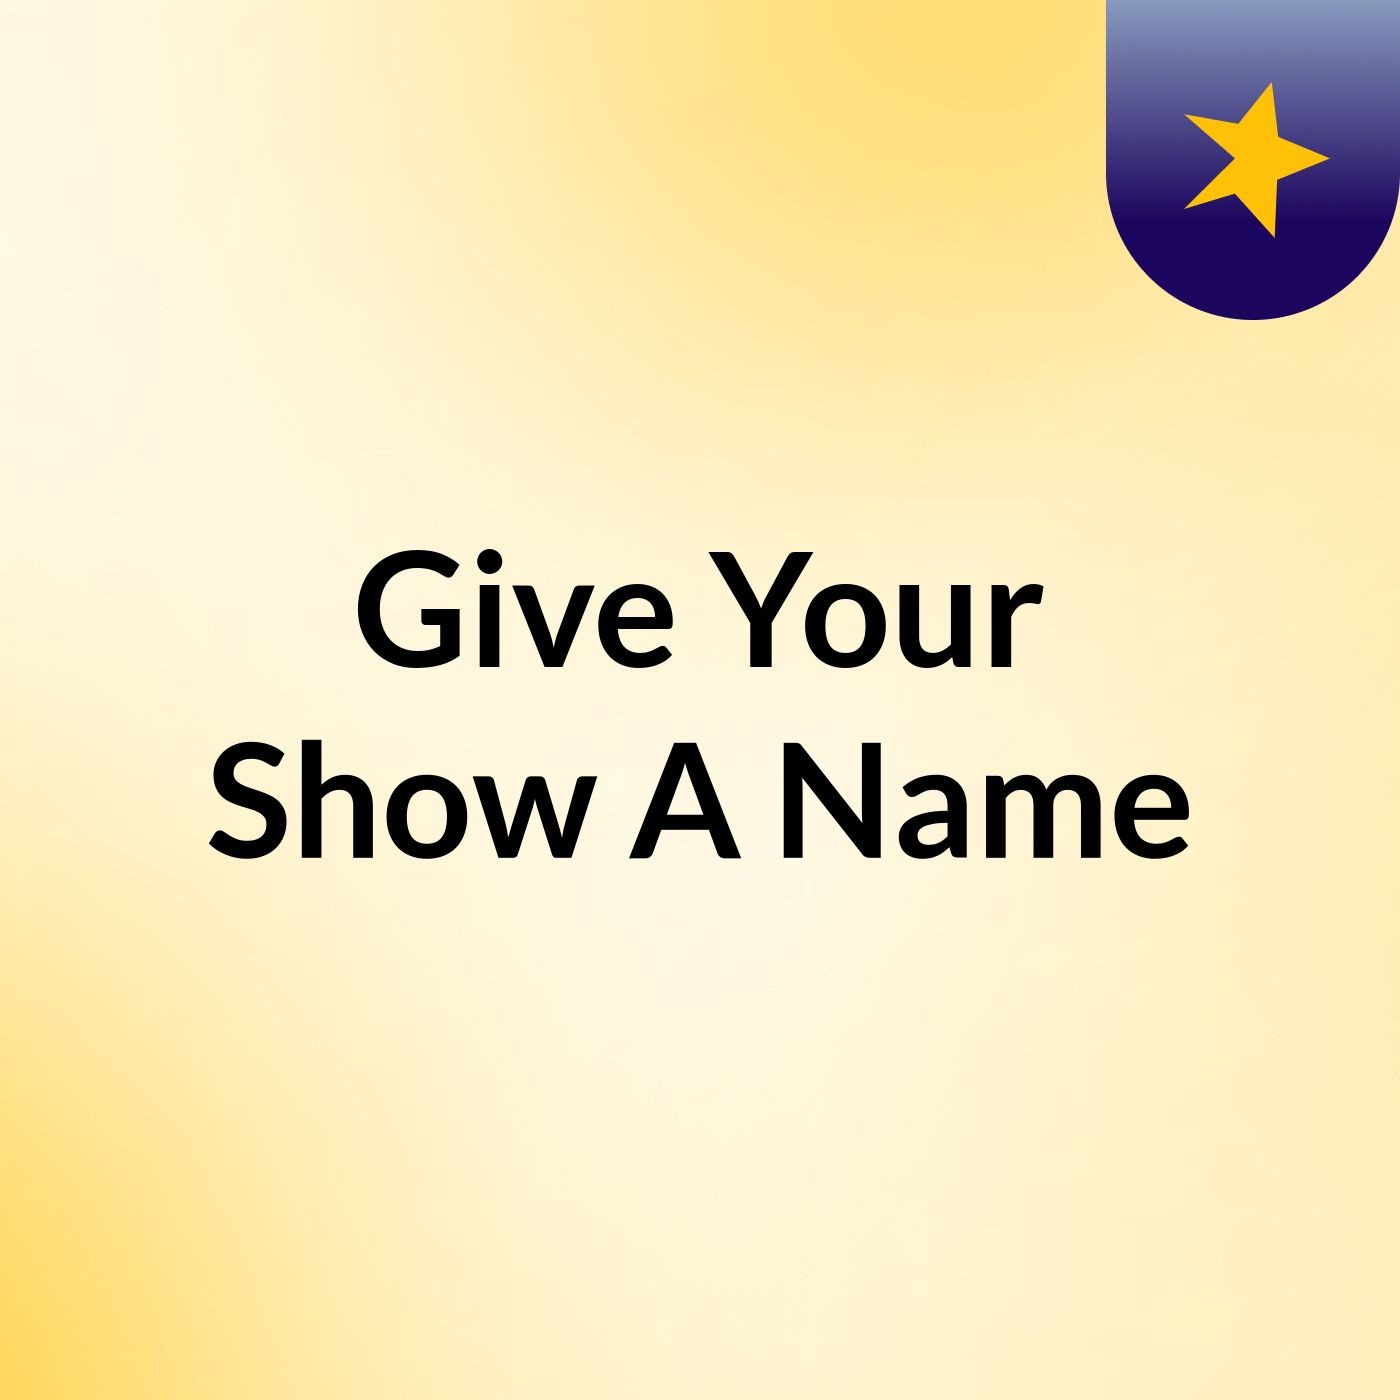 Give Your Show A Name